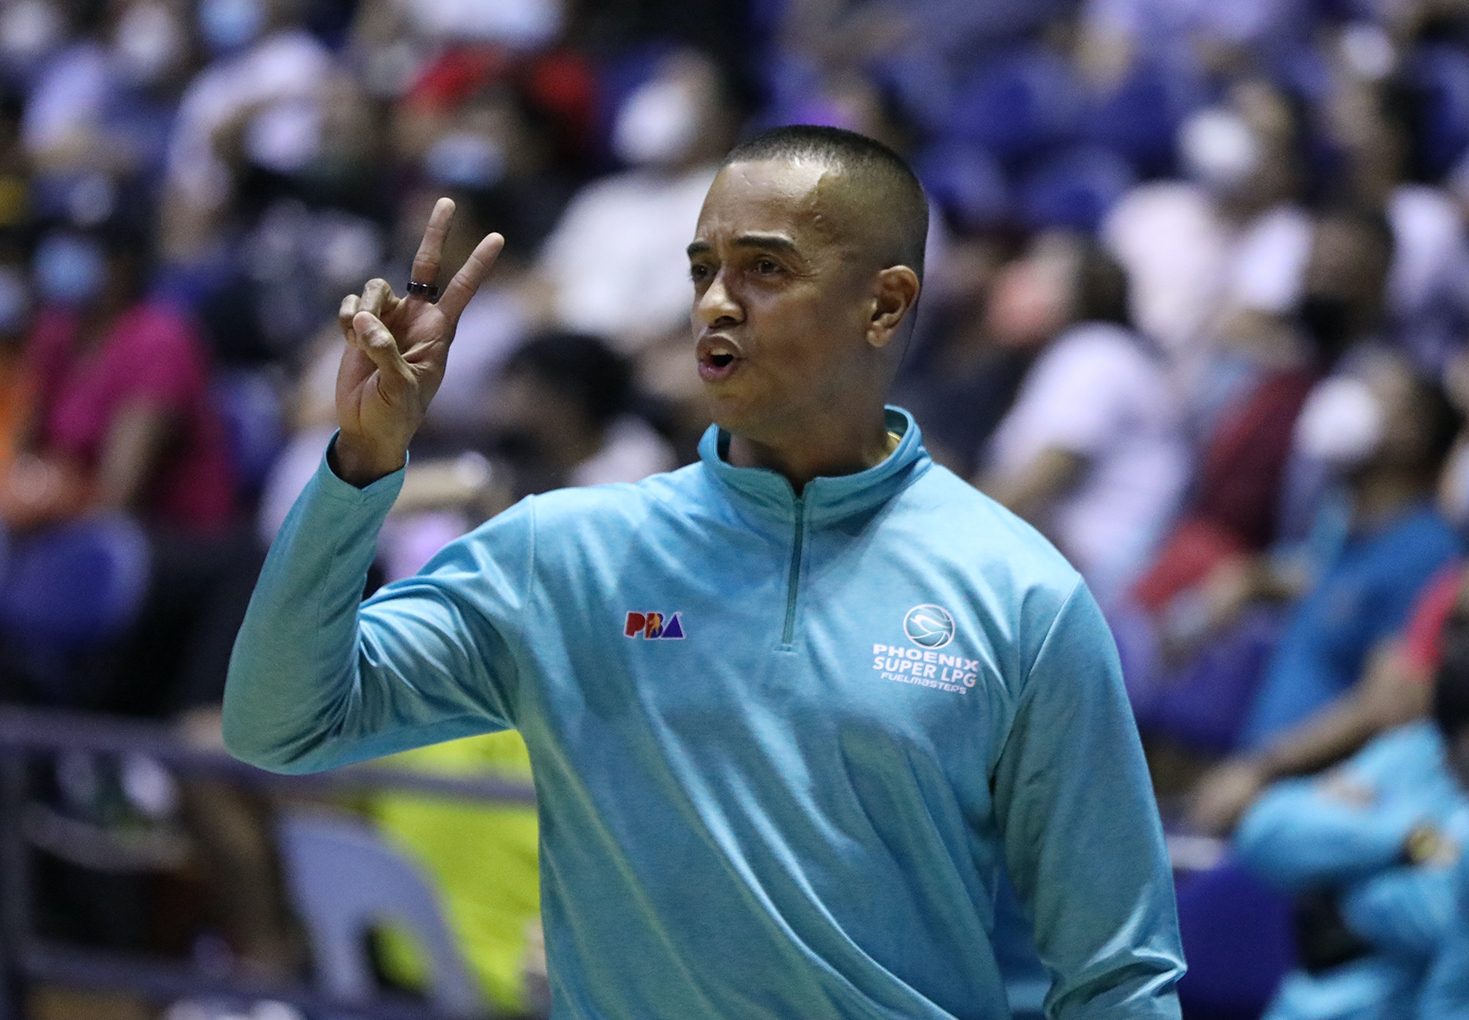 Phoenix, Topex Robinson part ways after 5 years